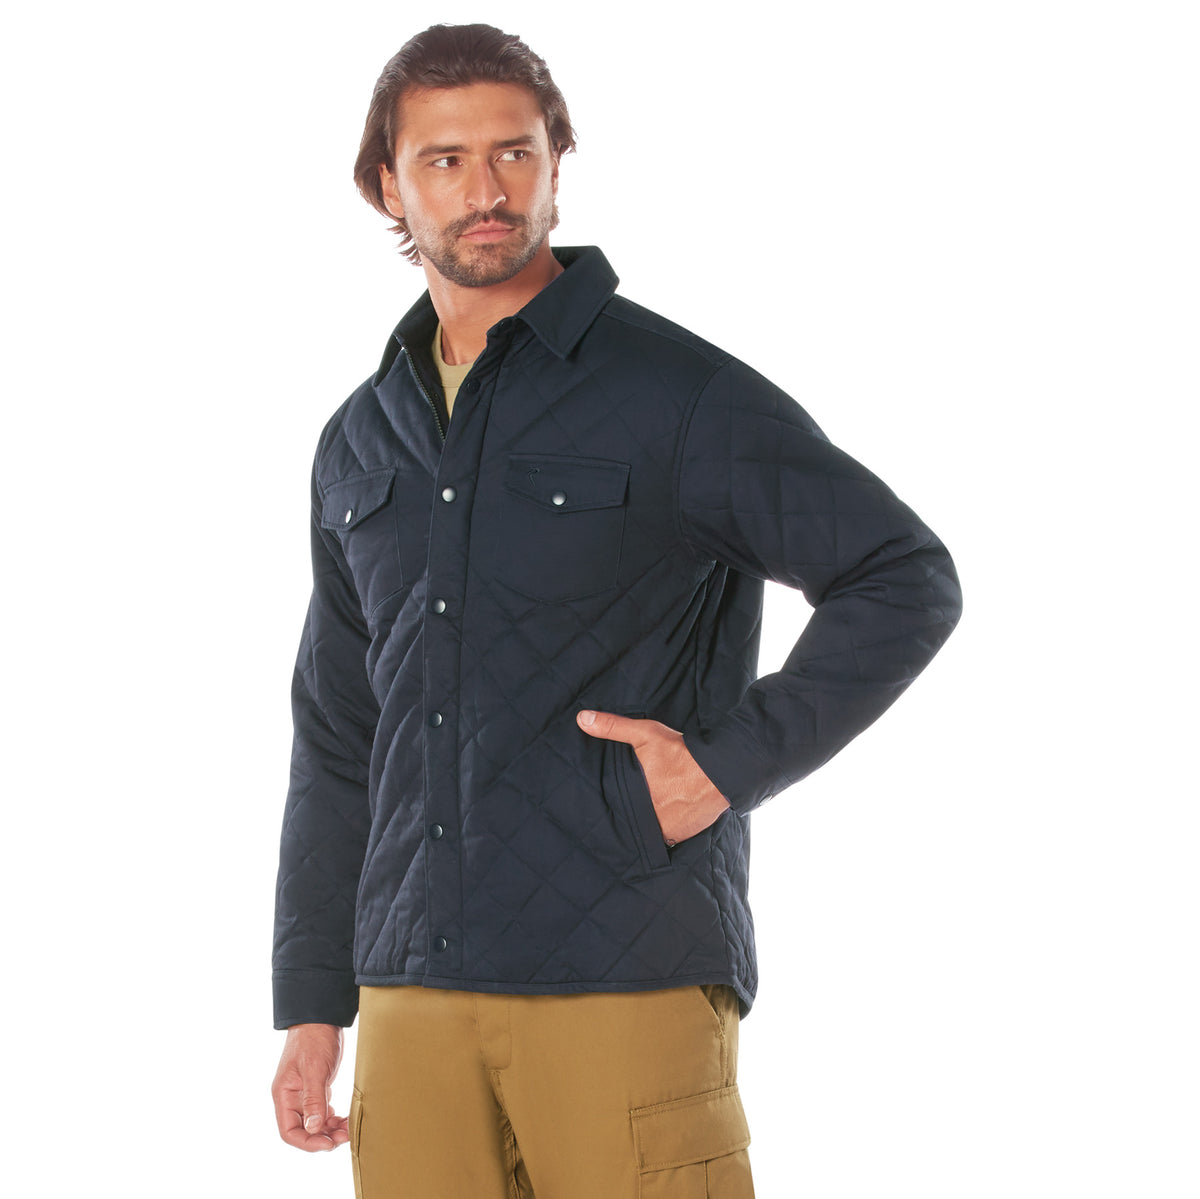 Rothco Diamond Quilted Cotton Jacket